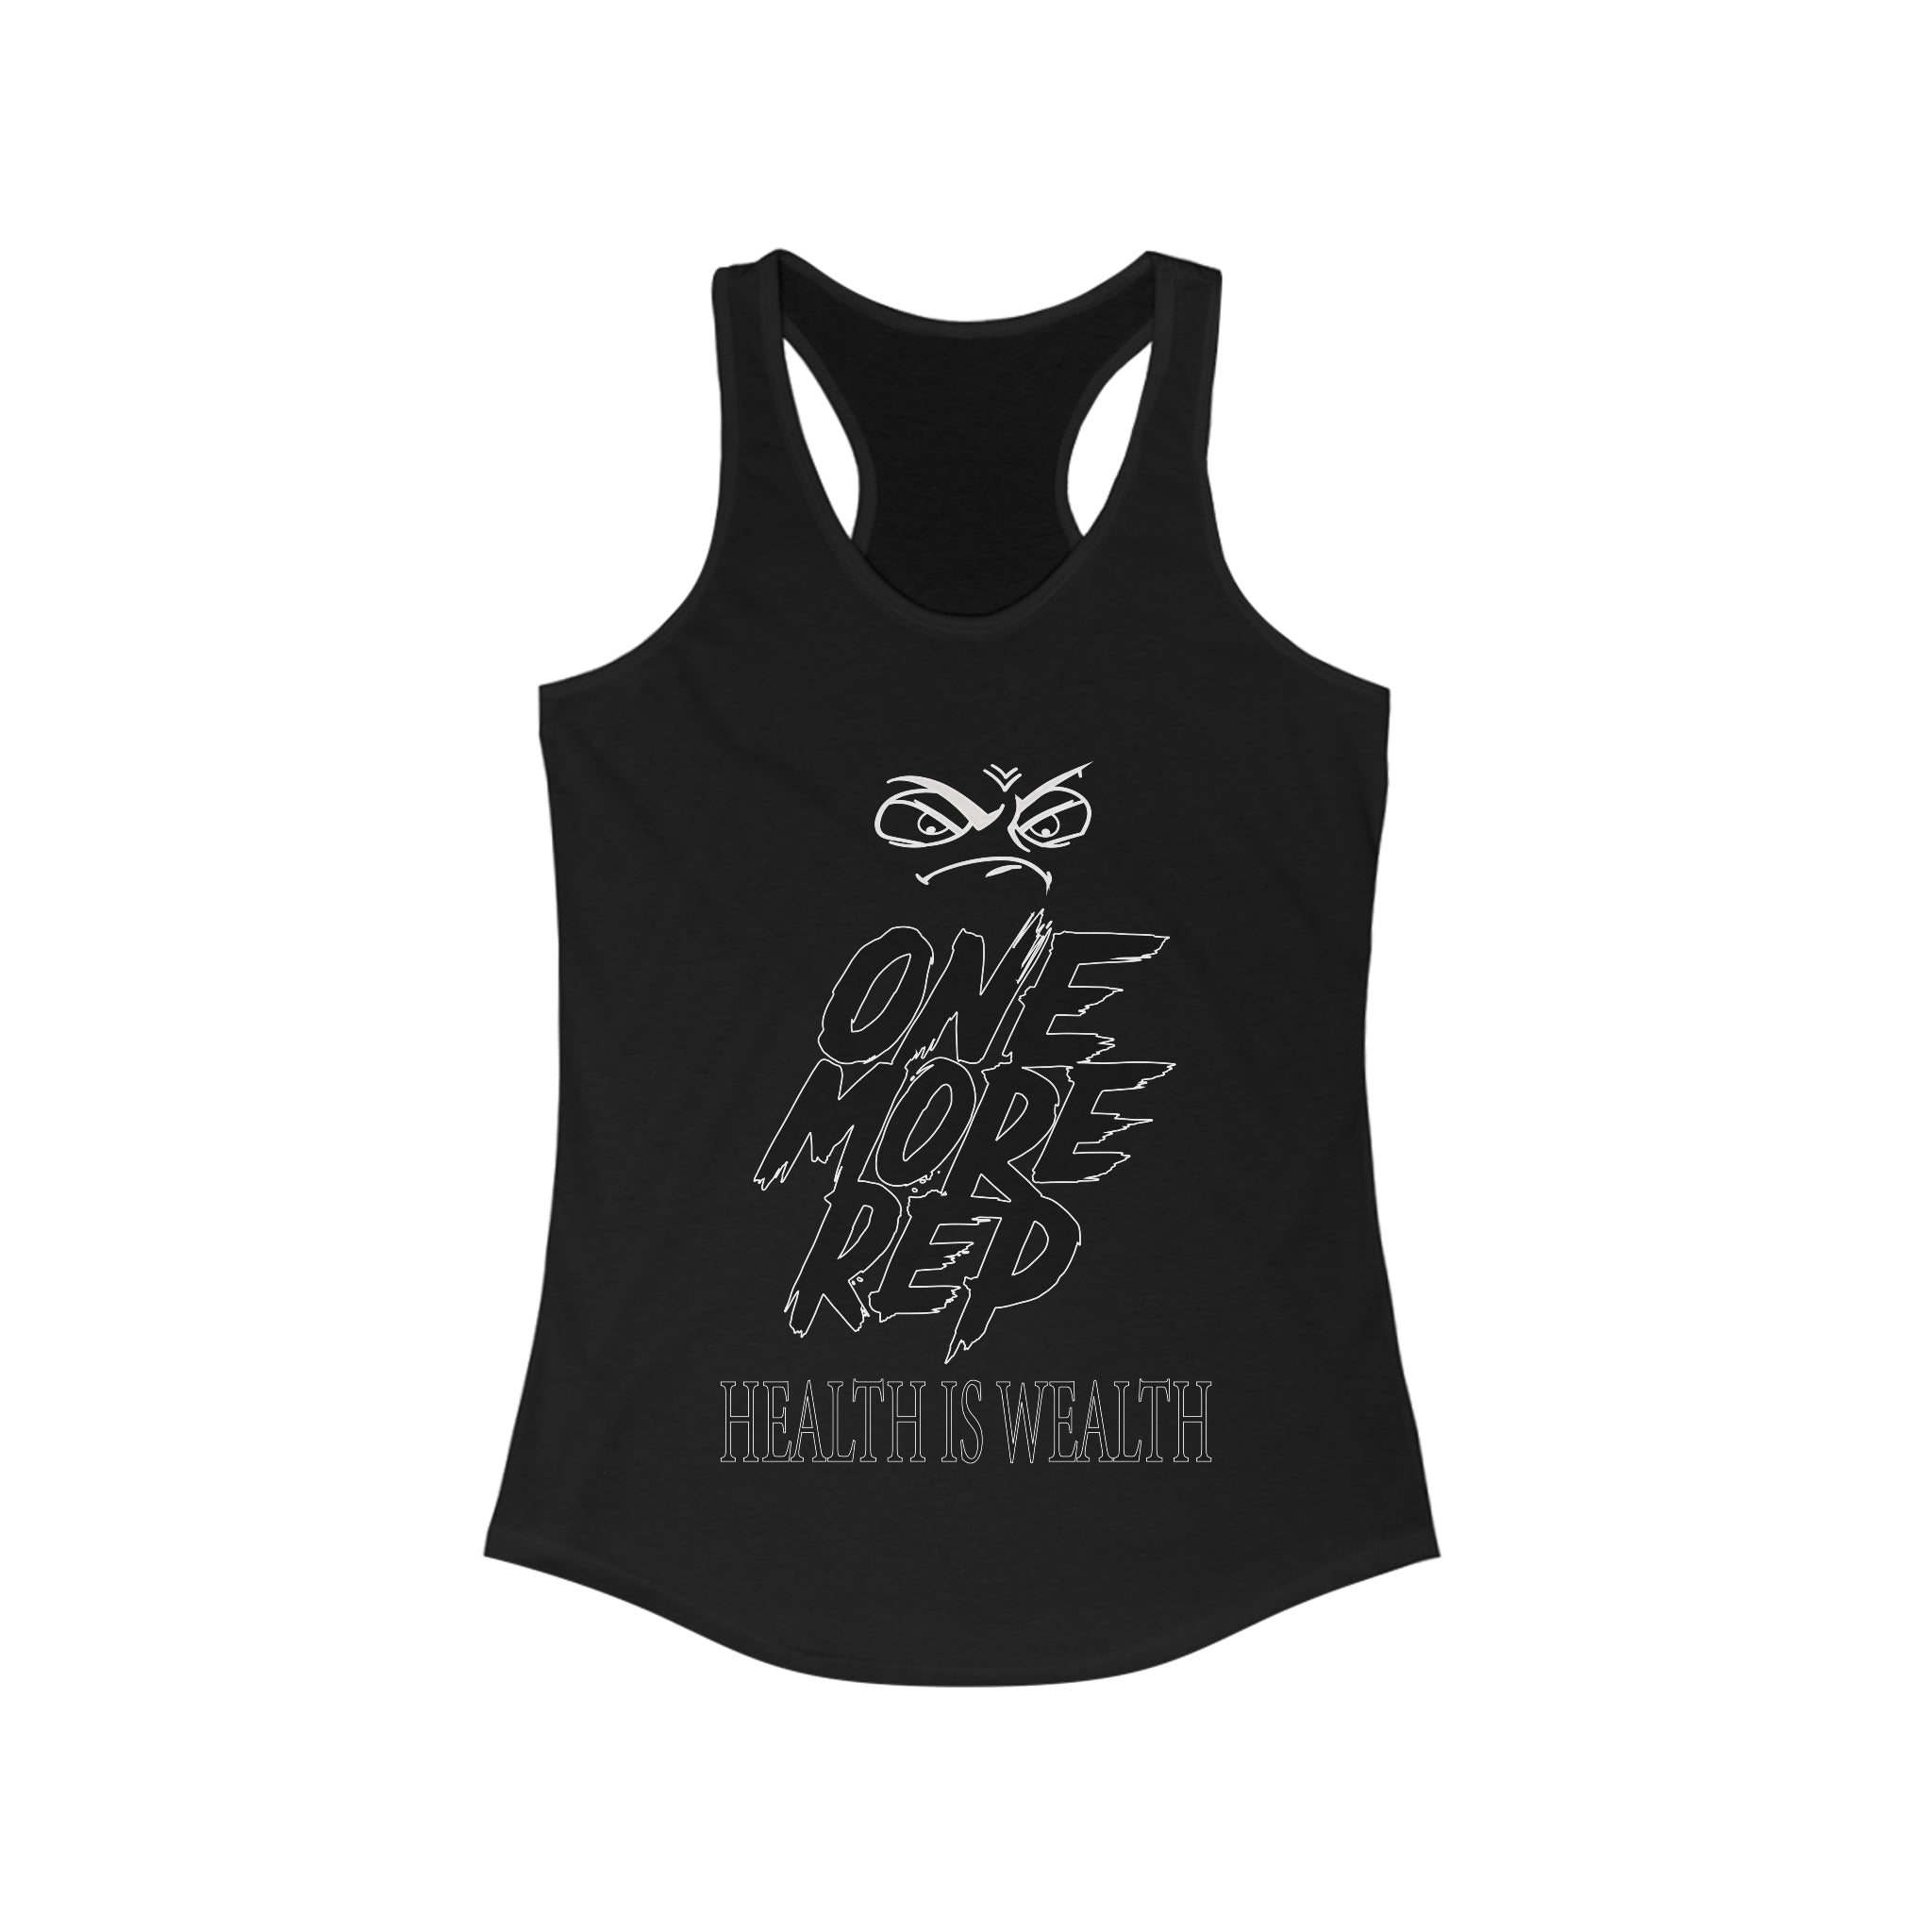 A high-quality print of this slim fit tank-top will turn heads. Bystanders won't be disappointed - the racerback cut looks good on any woman's shoulders.